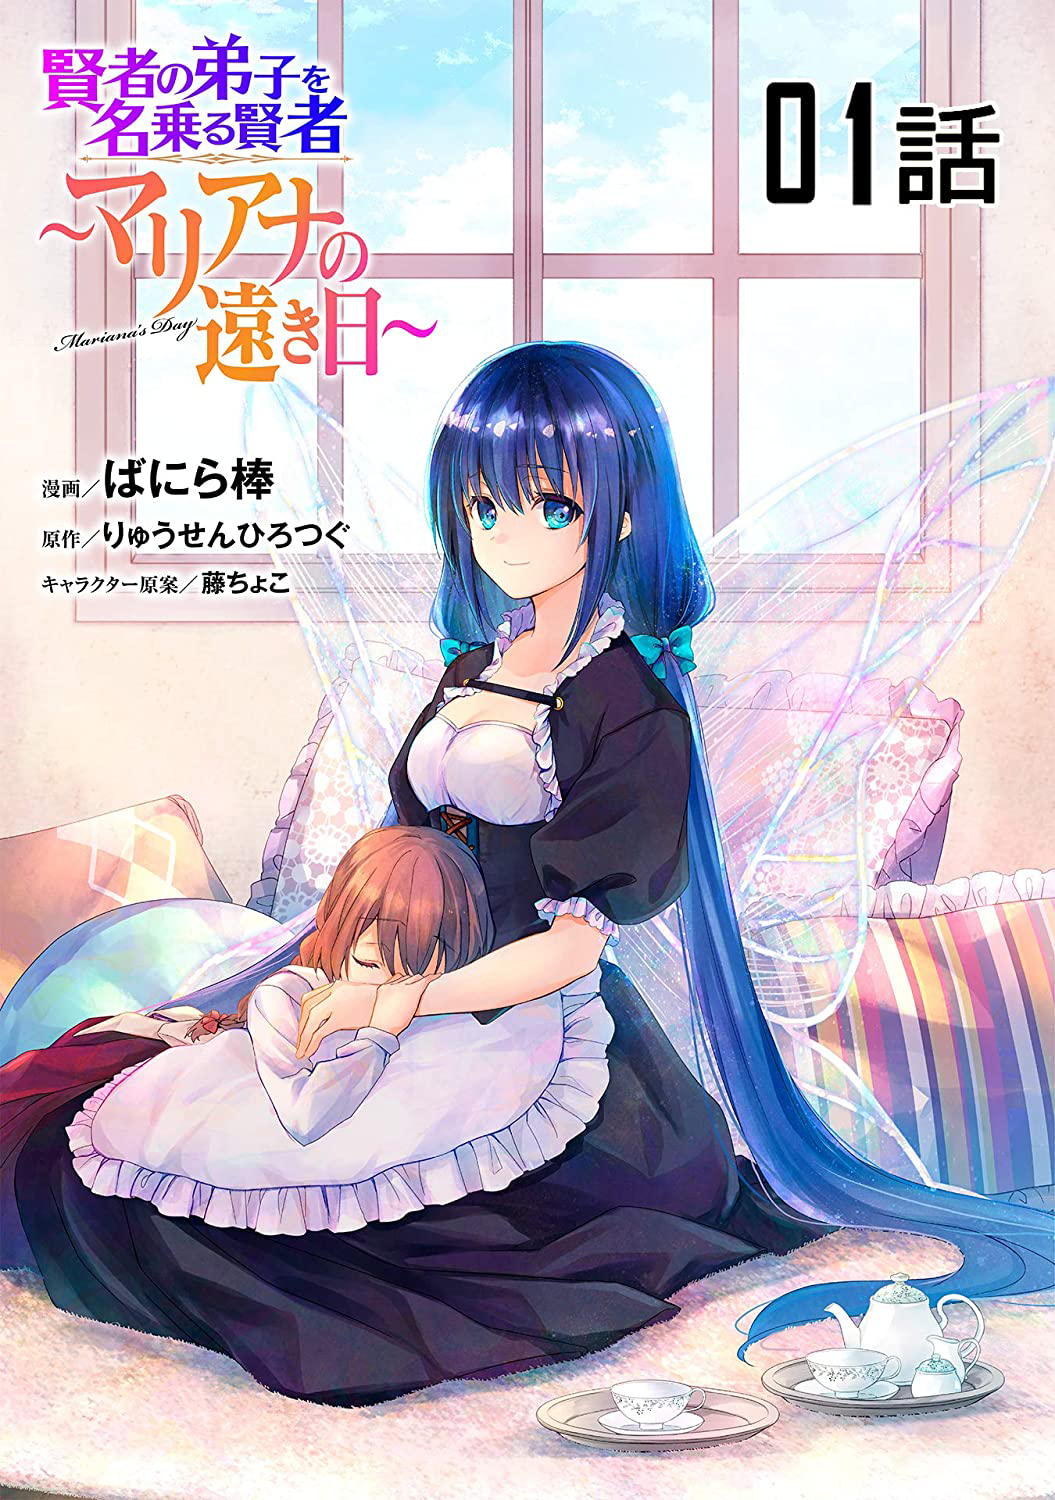 She Professed Herself Pupil of the Wise Man: Mira and the Wonderful  Summoned Spirits Manga | Anime-Planet